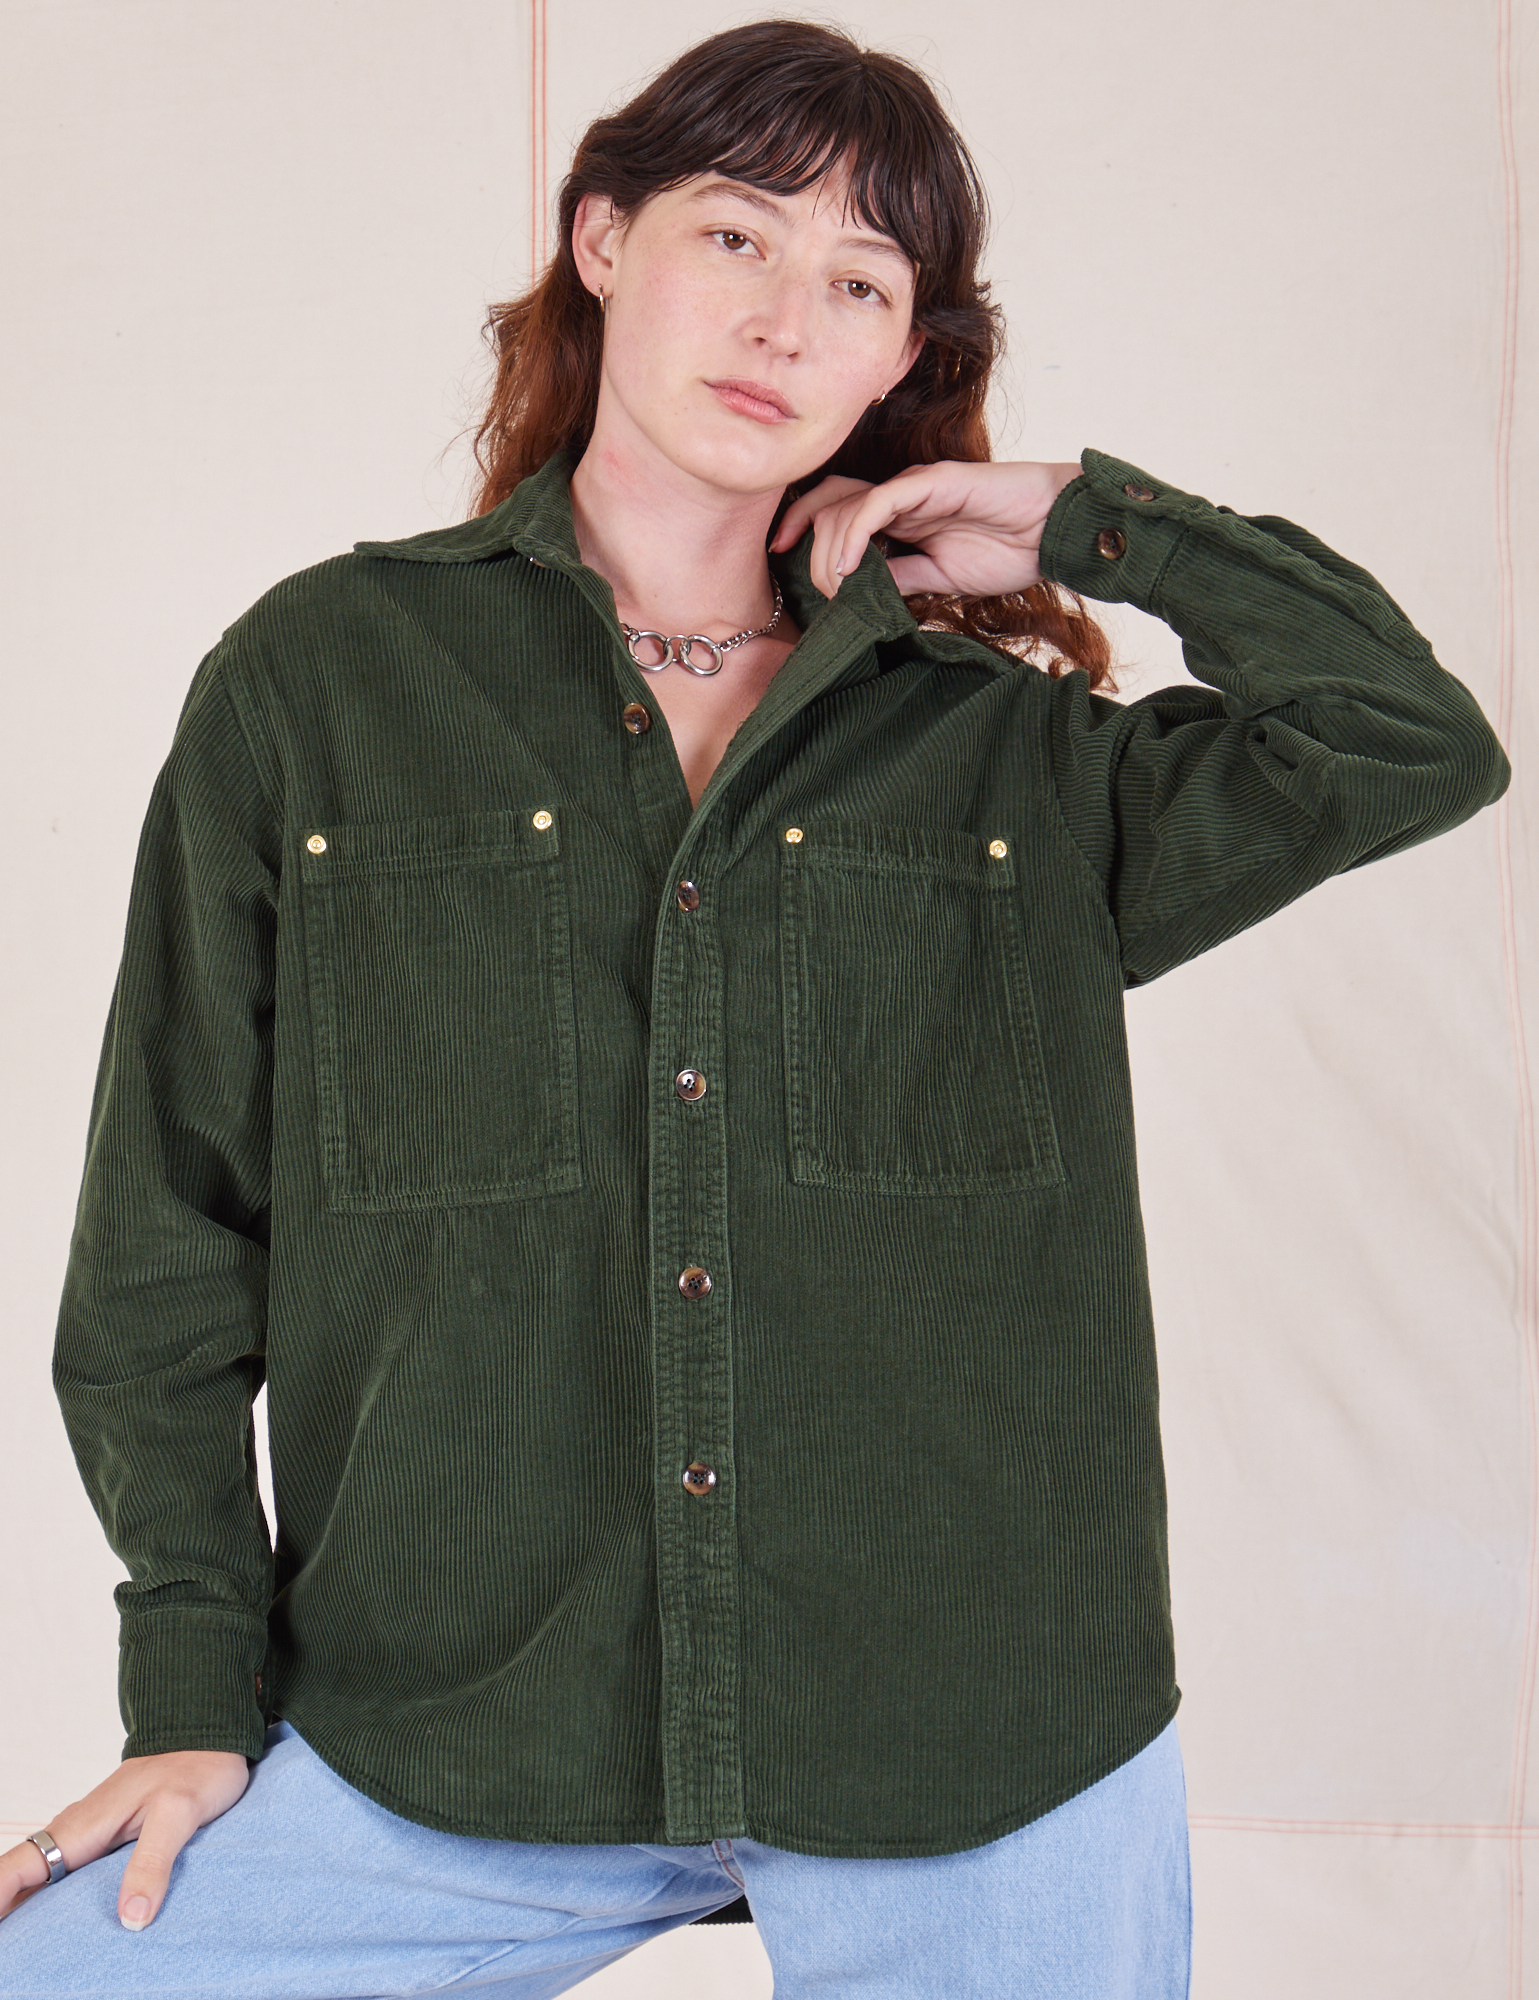 Alex is 5&#39;8&quot; and wearing P Corduroy Overshirt in Swamp Green